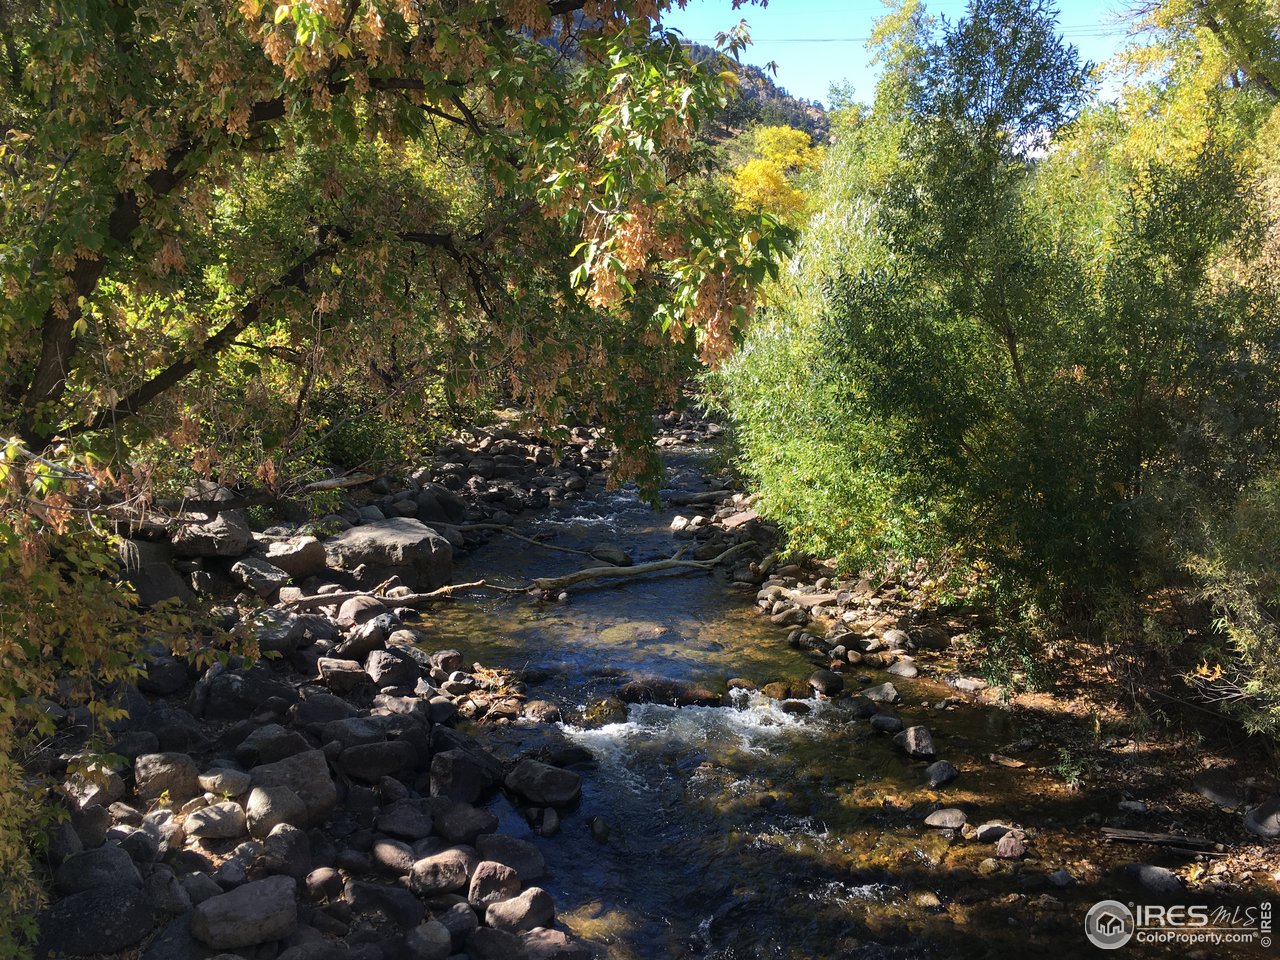 5 minute Stroll to the Bridge Over Boulder Creek  